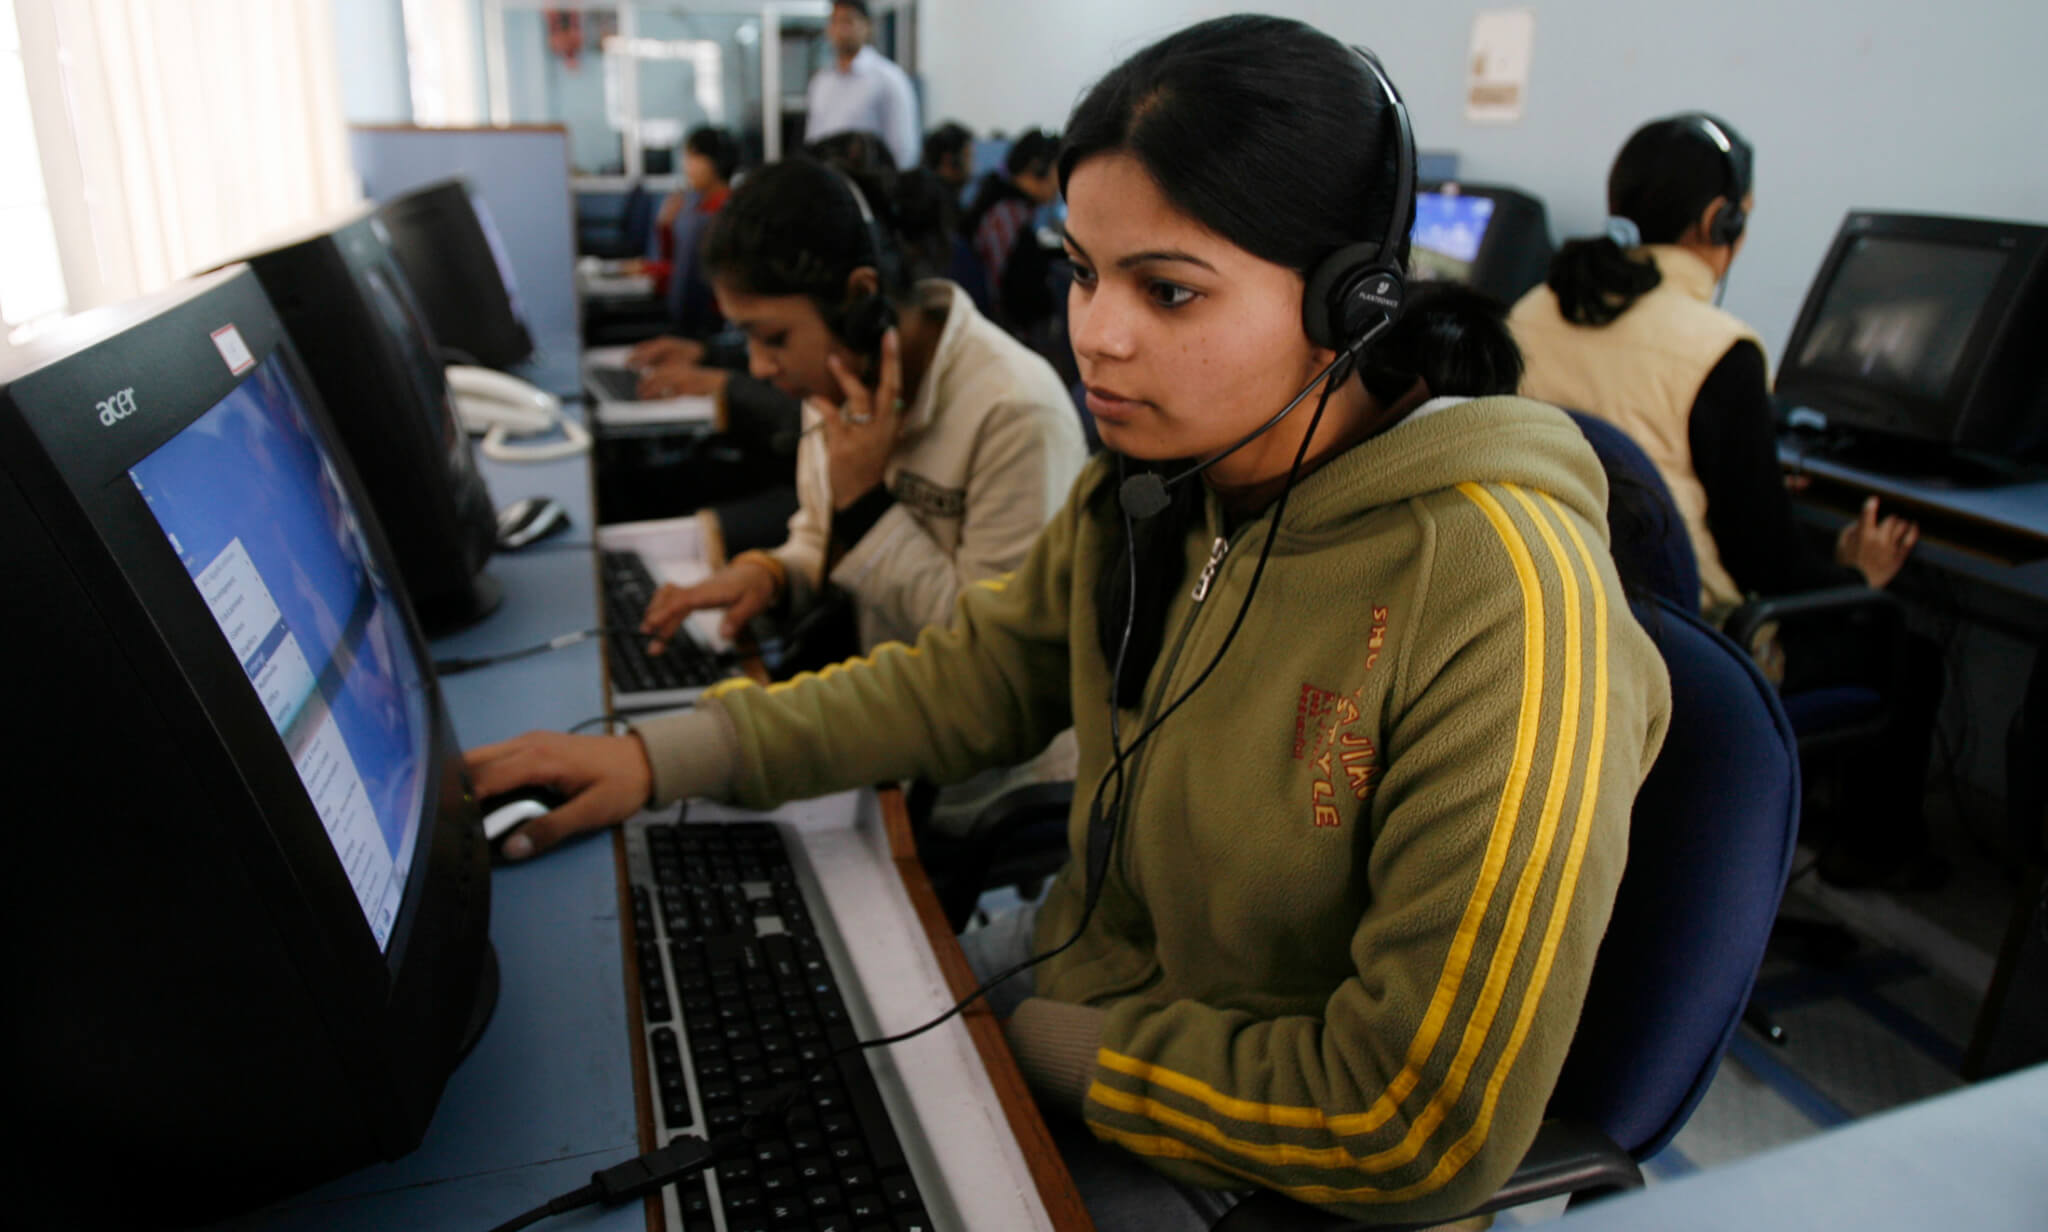 India’s female workforce dropped to 29.3% in Q2